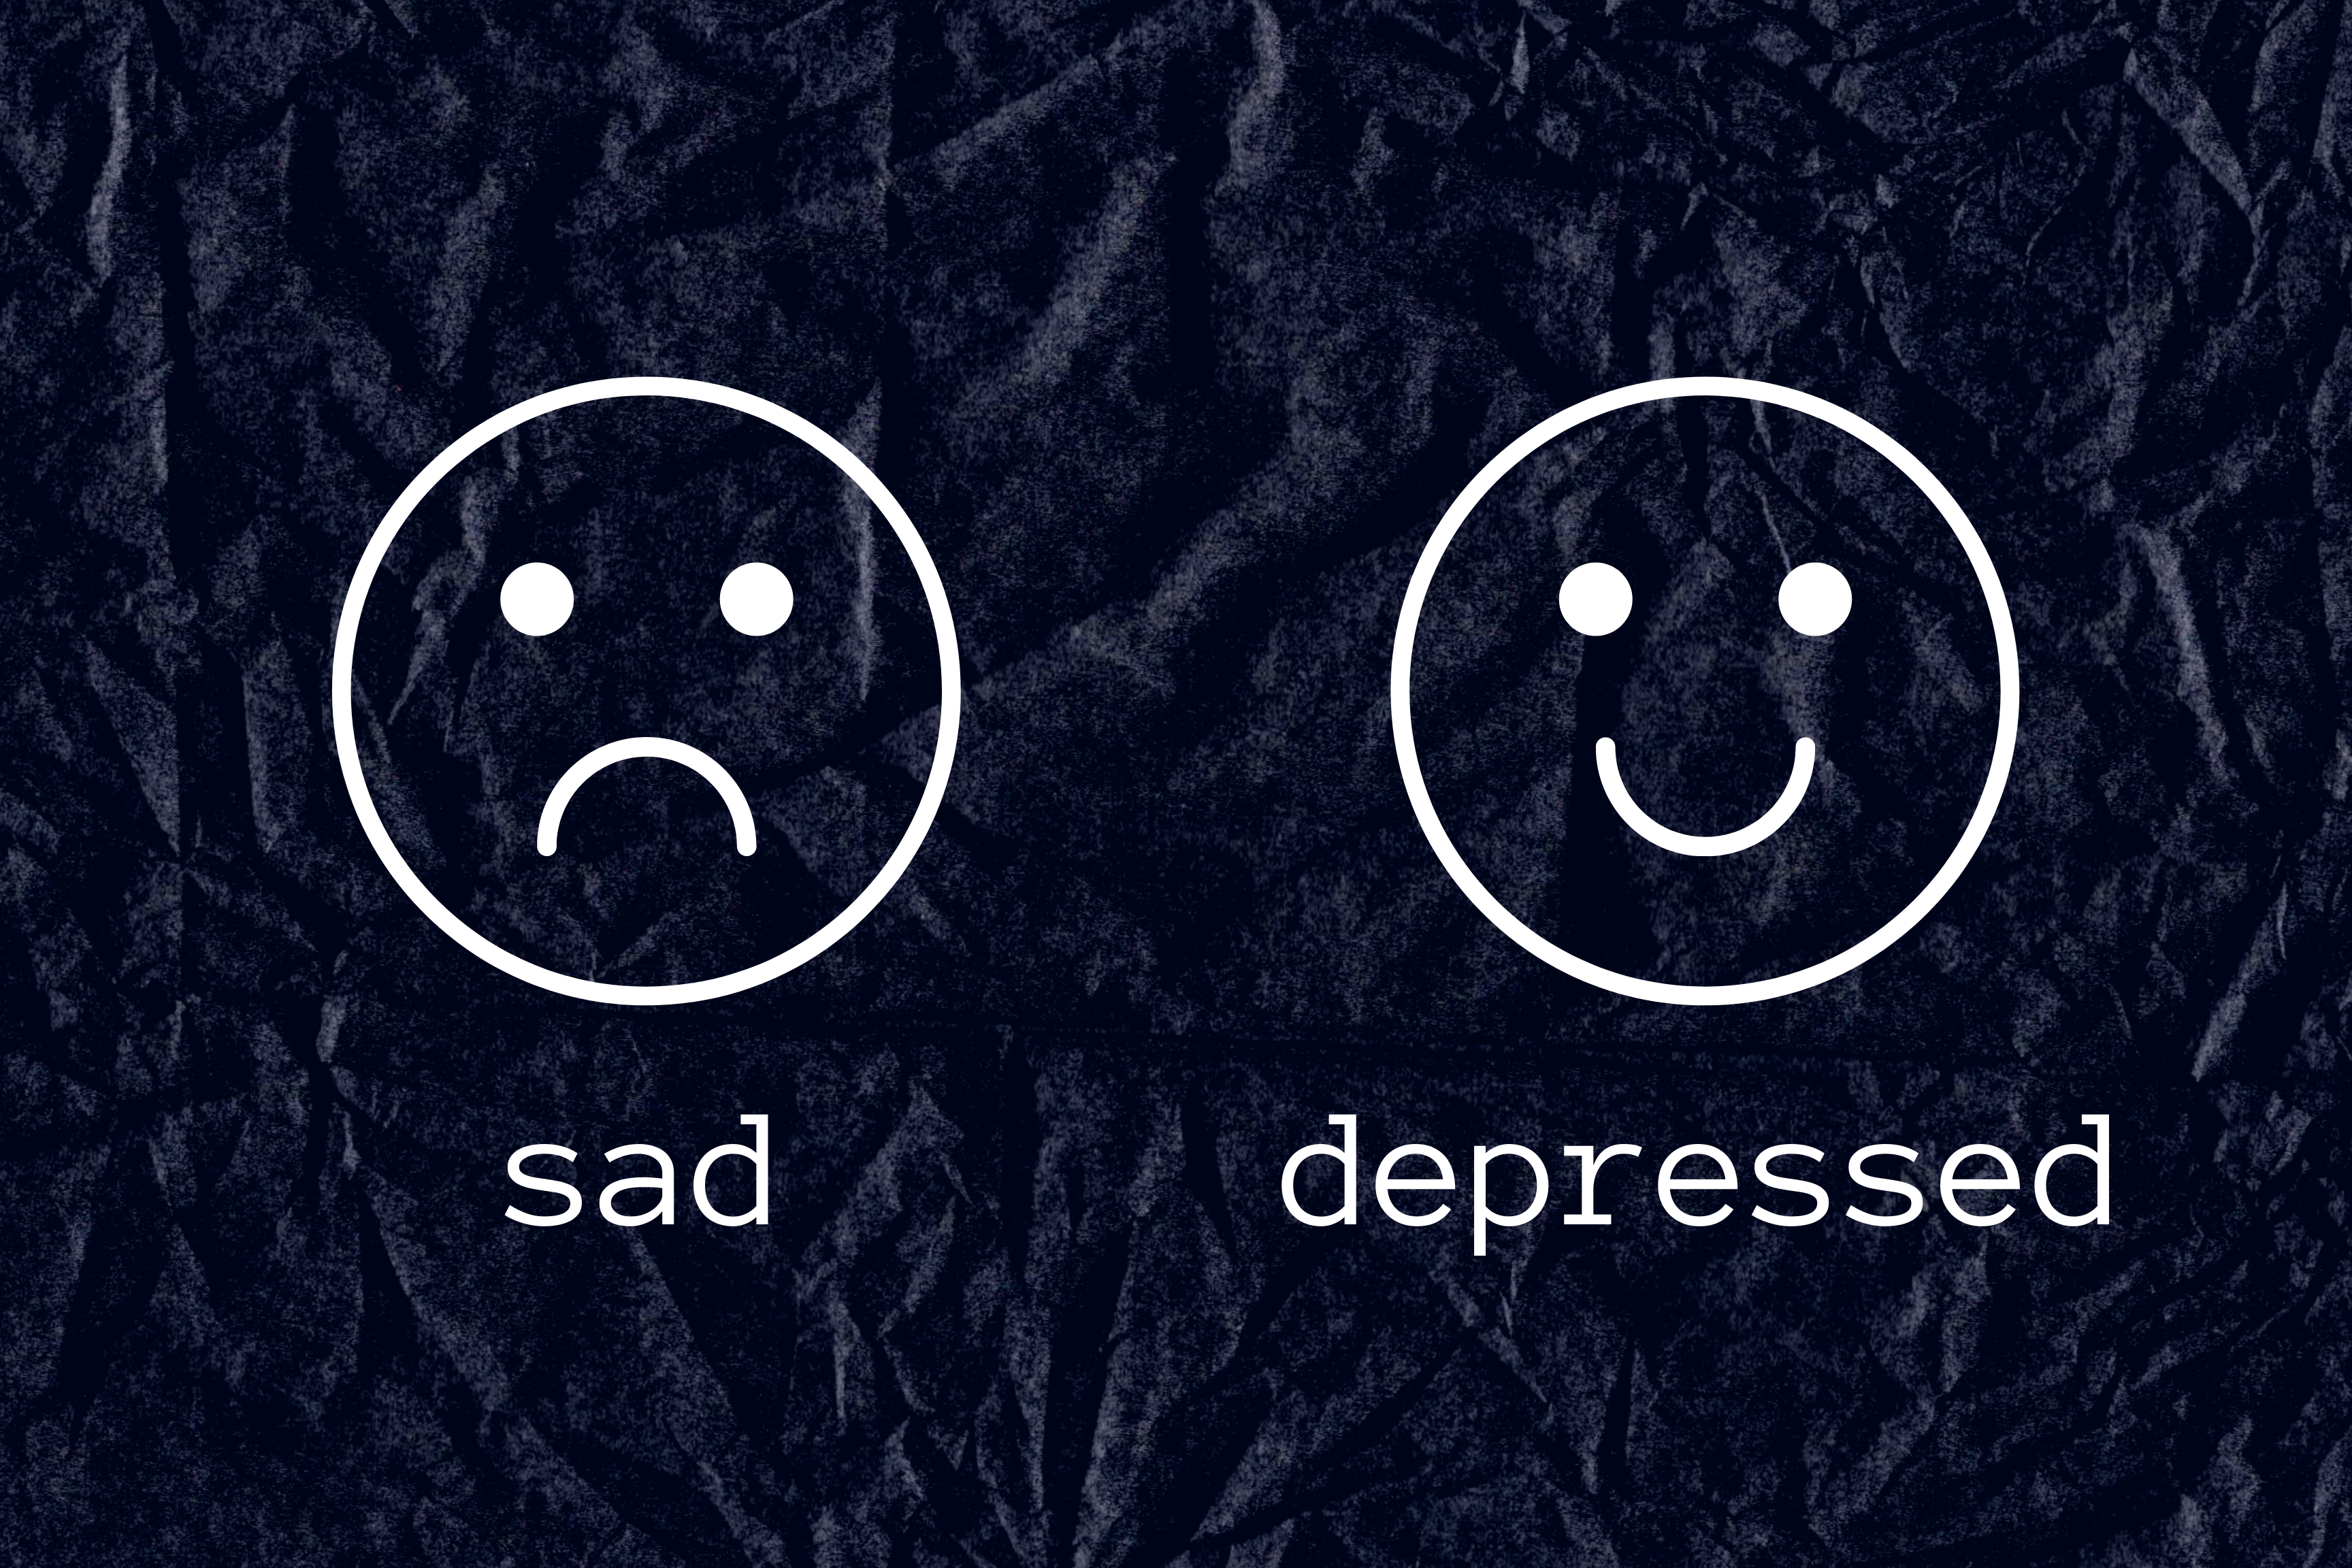 Depression isn't trendy, so why laugh about it? - Excalibur